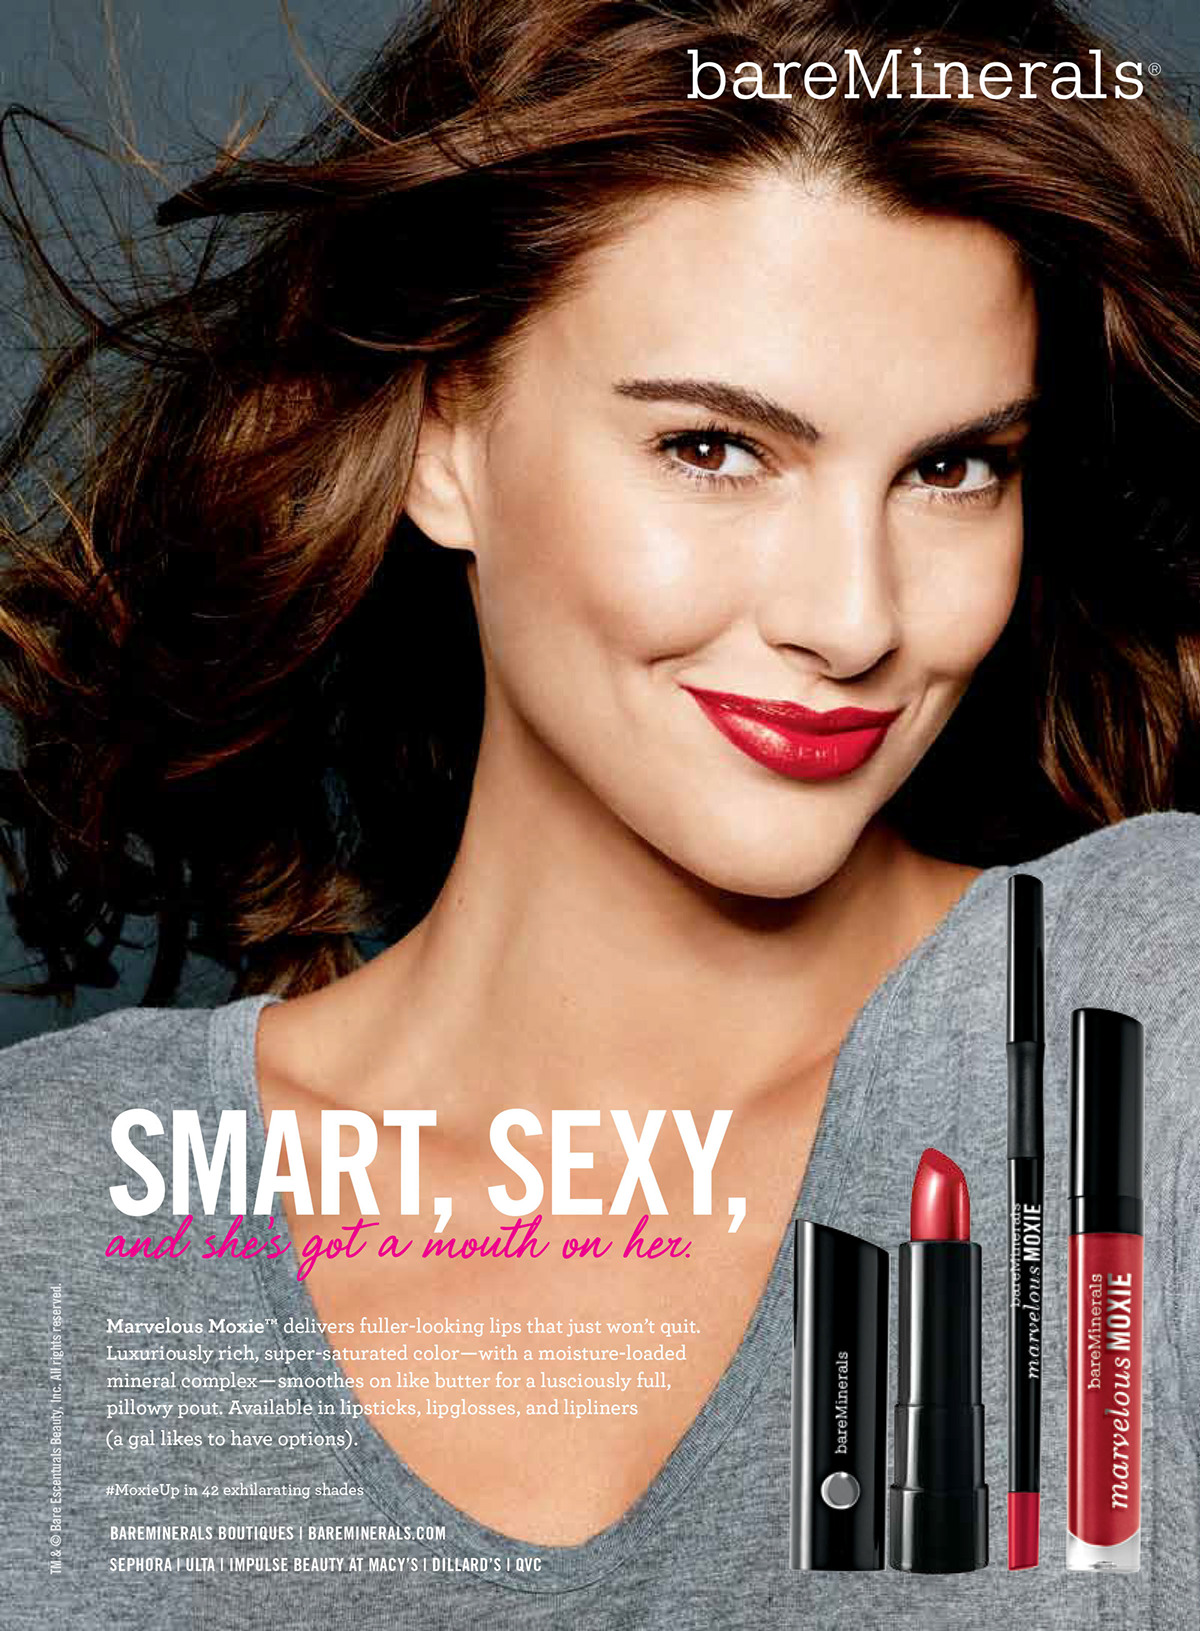 Marvelous Moxie beauty make-up Mineral Make-up lips campaign bareMinerals